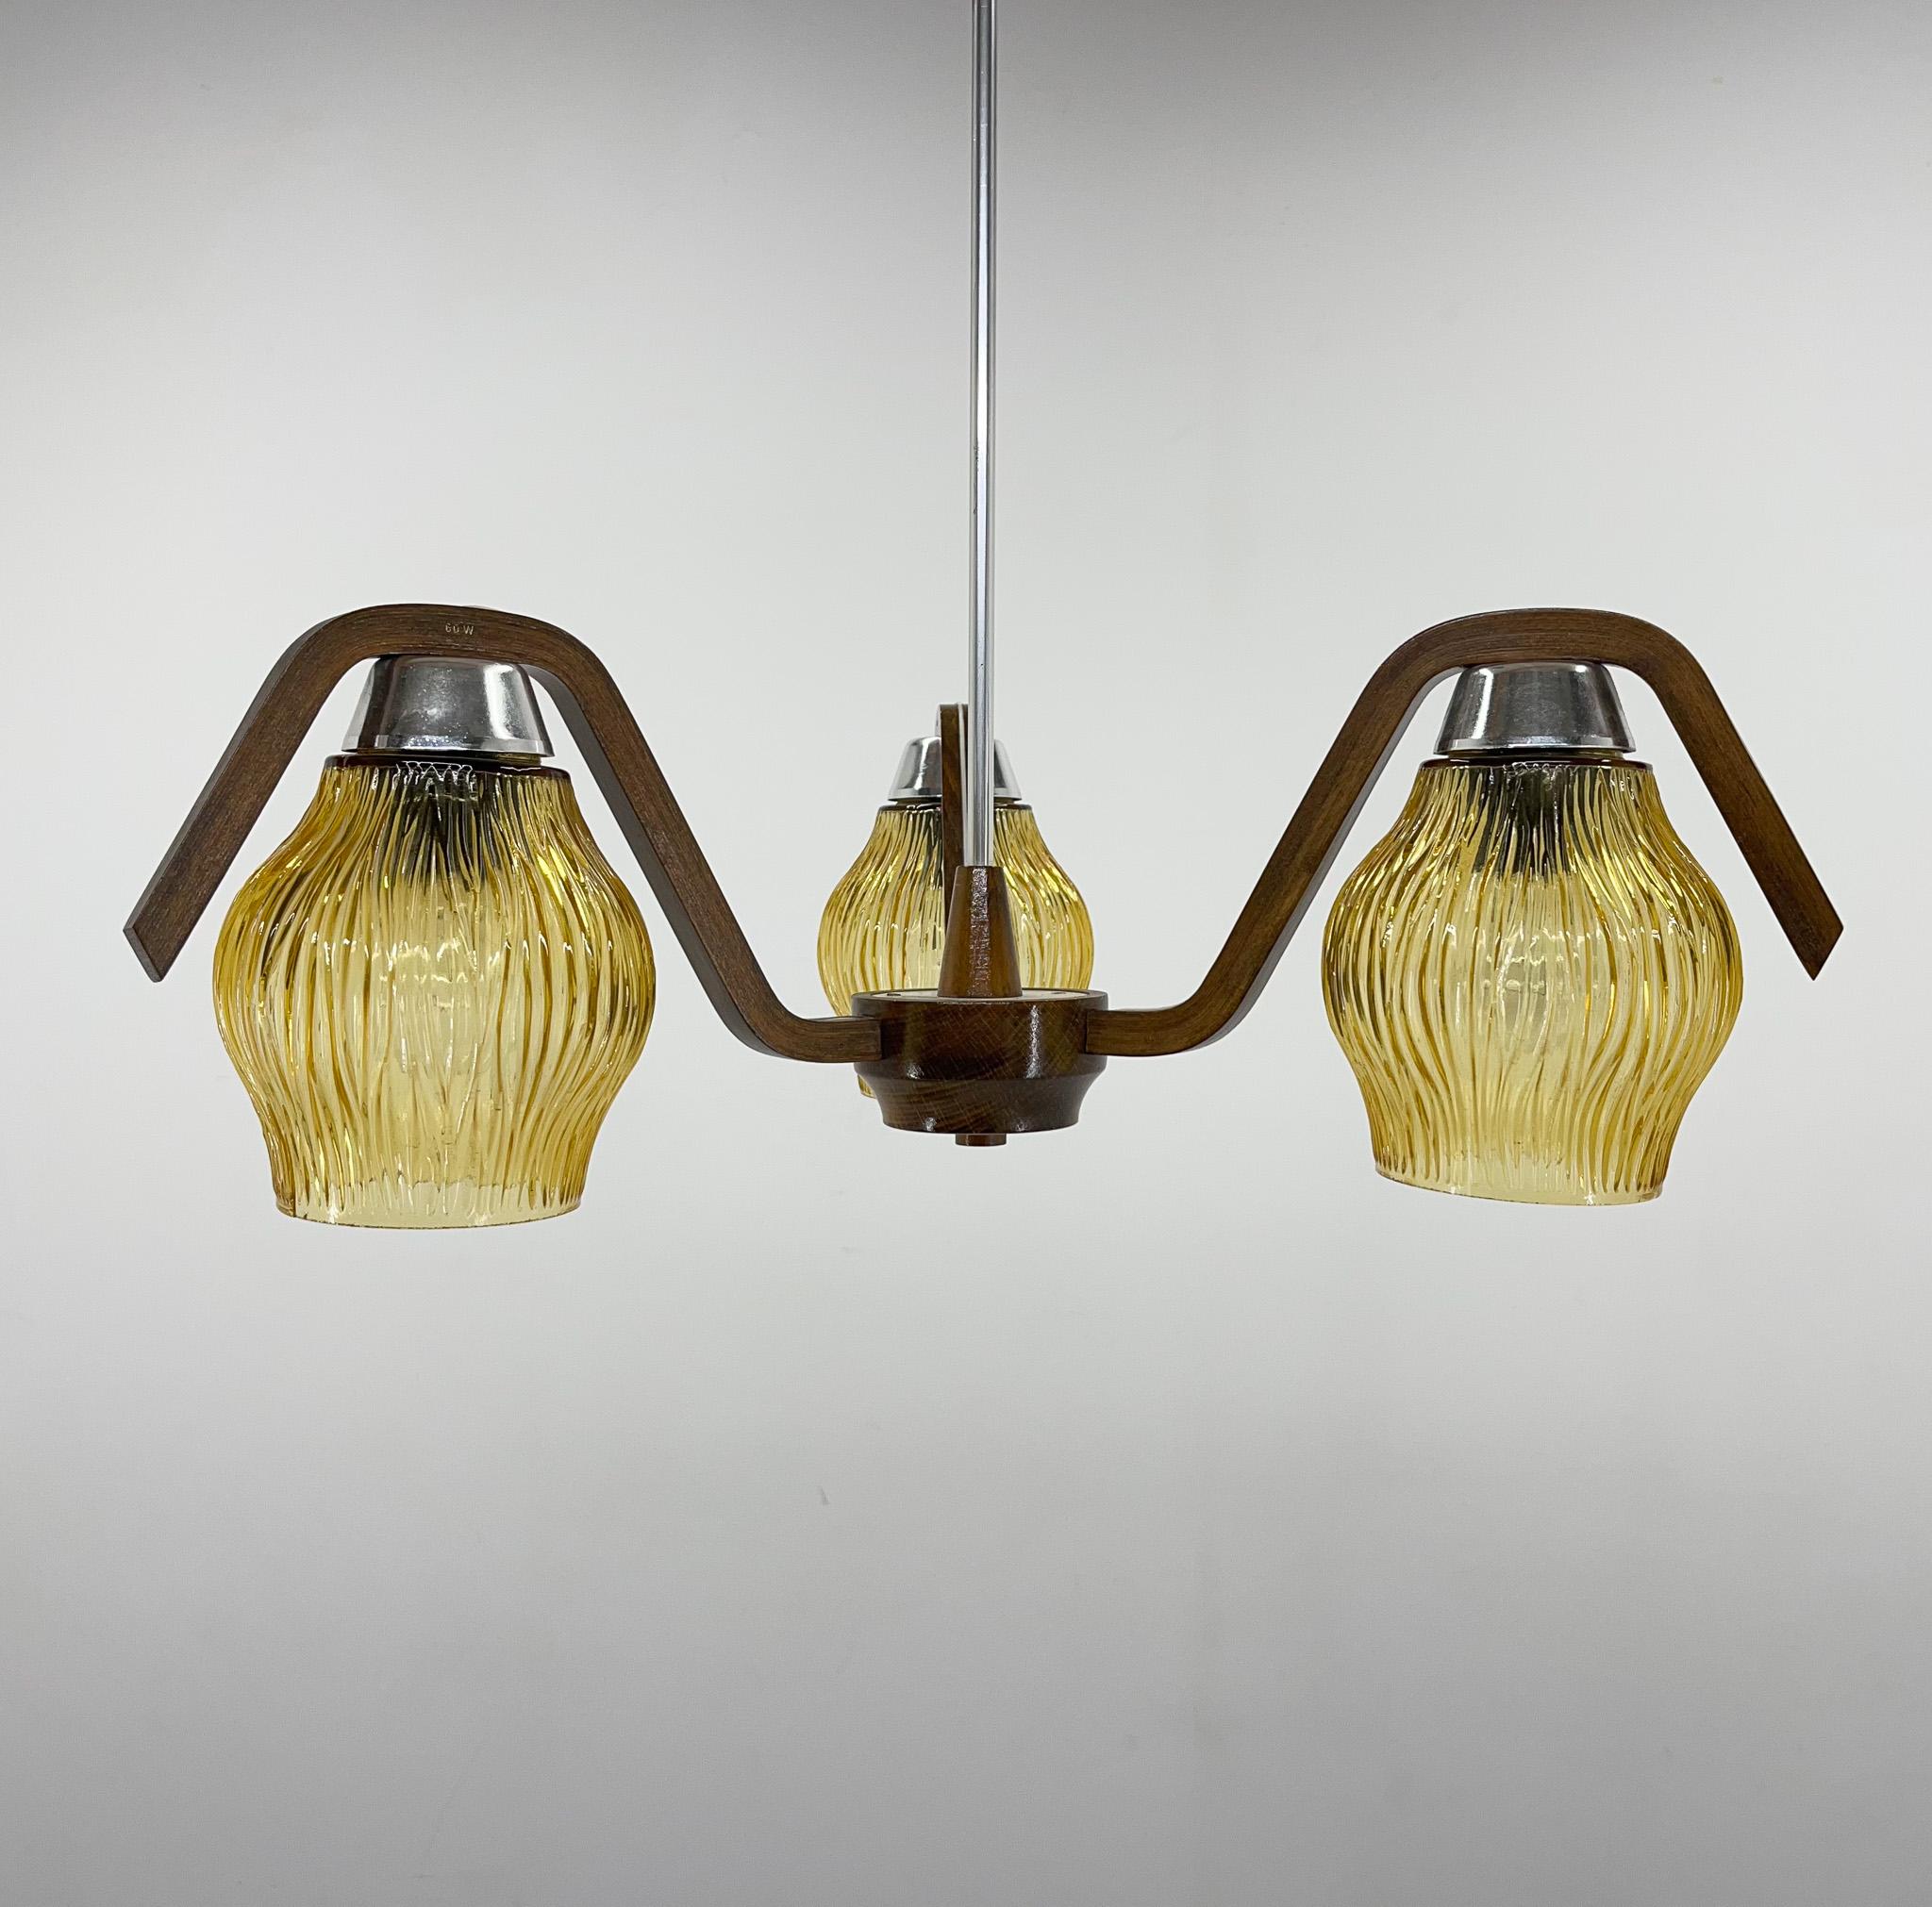 Wood and glass 3-arm chandelier made by Drevo Humpolec in former Czechoslovakia in the 1960's. Bulbs: 3 x E25-E27.